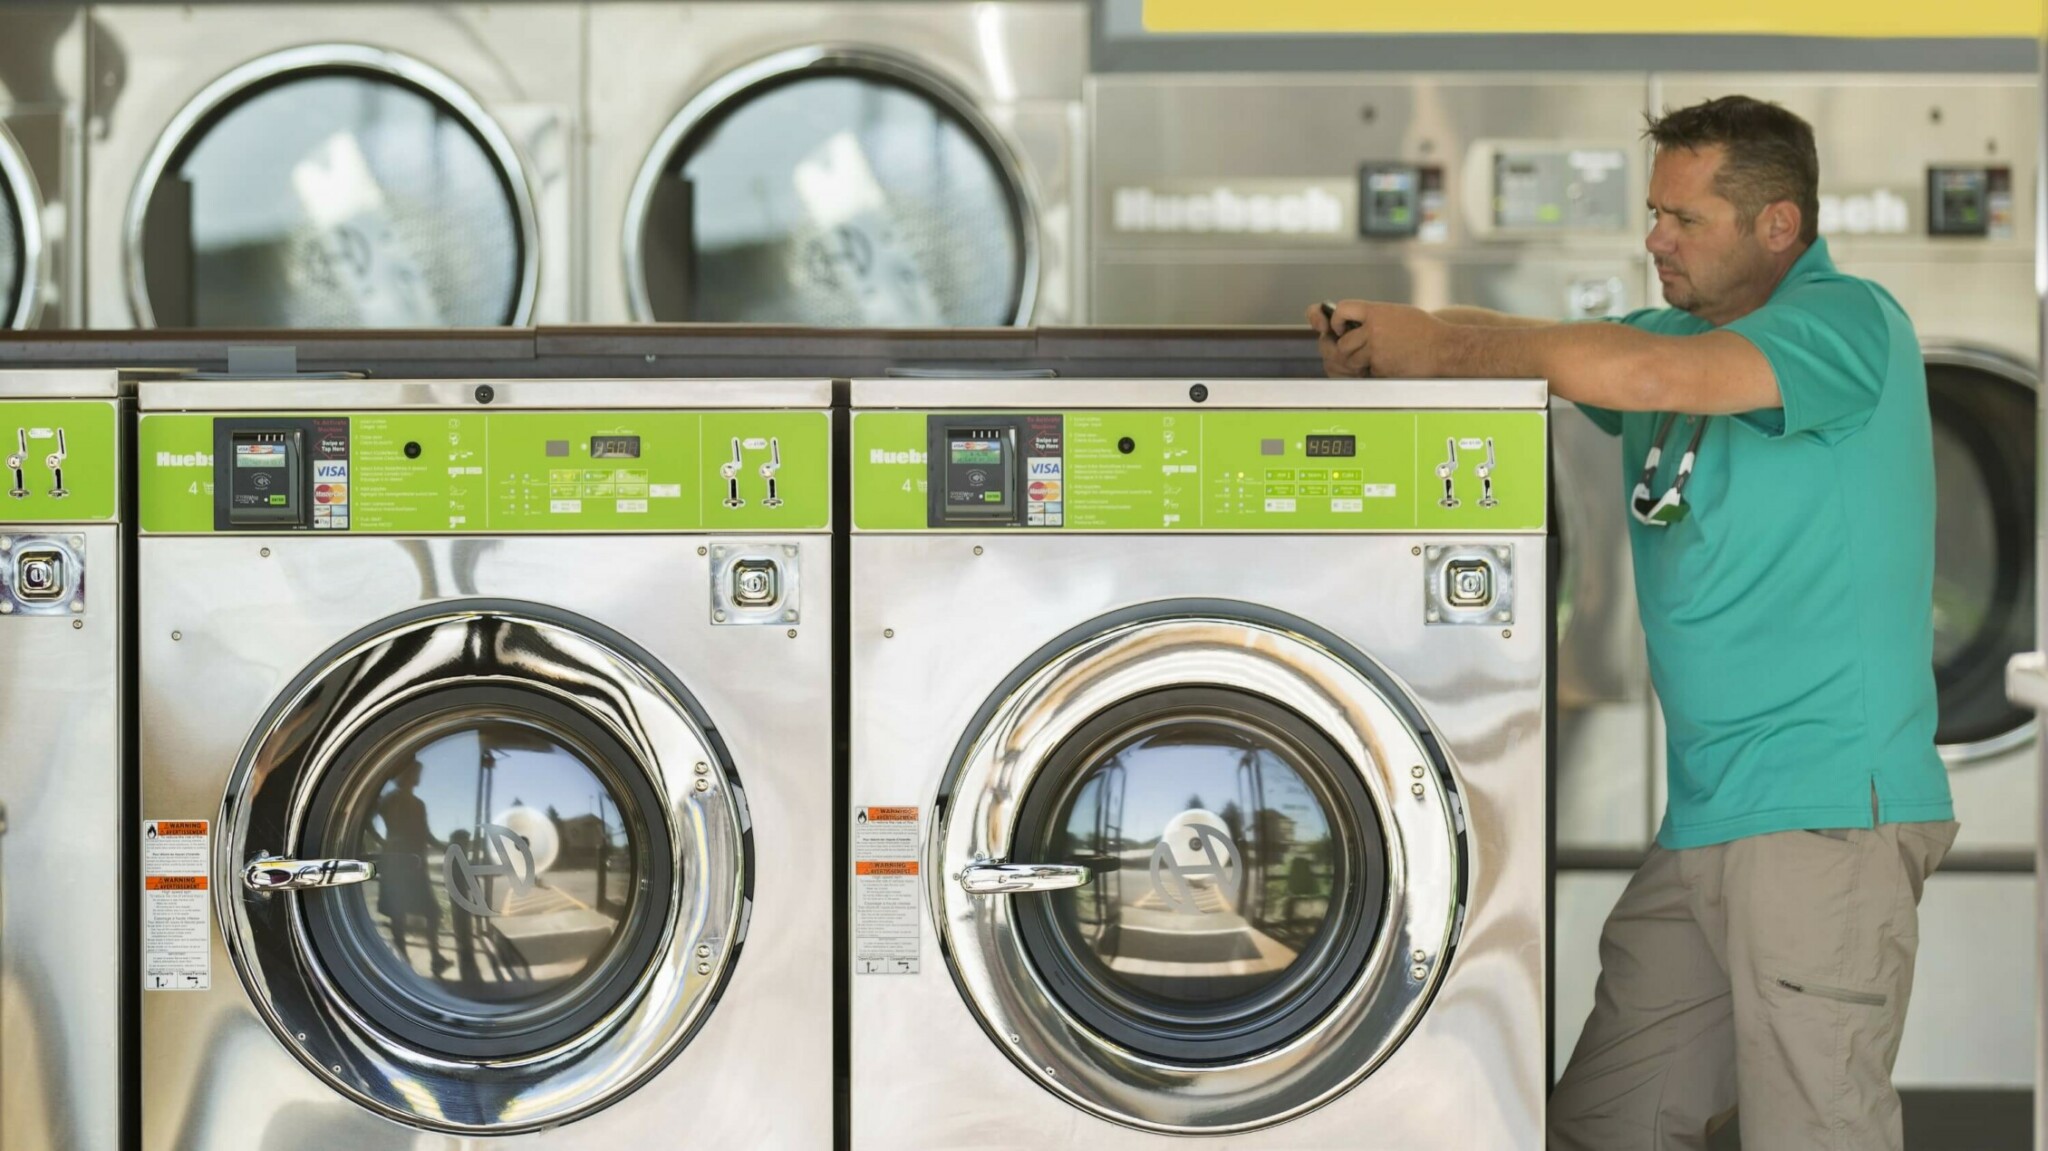 Start Making Money with a Huebsch Laundromat Investment